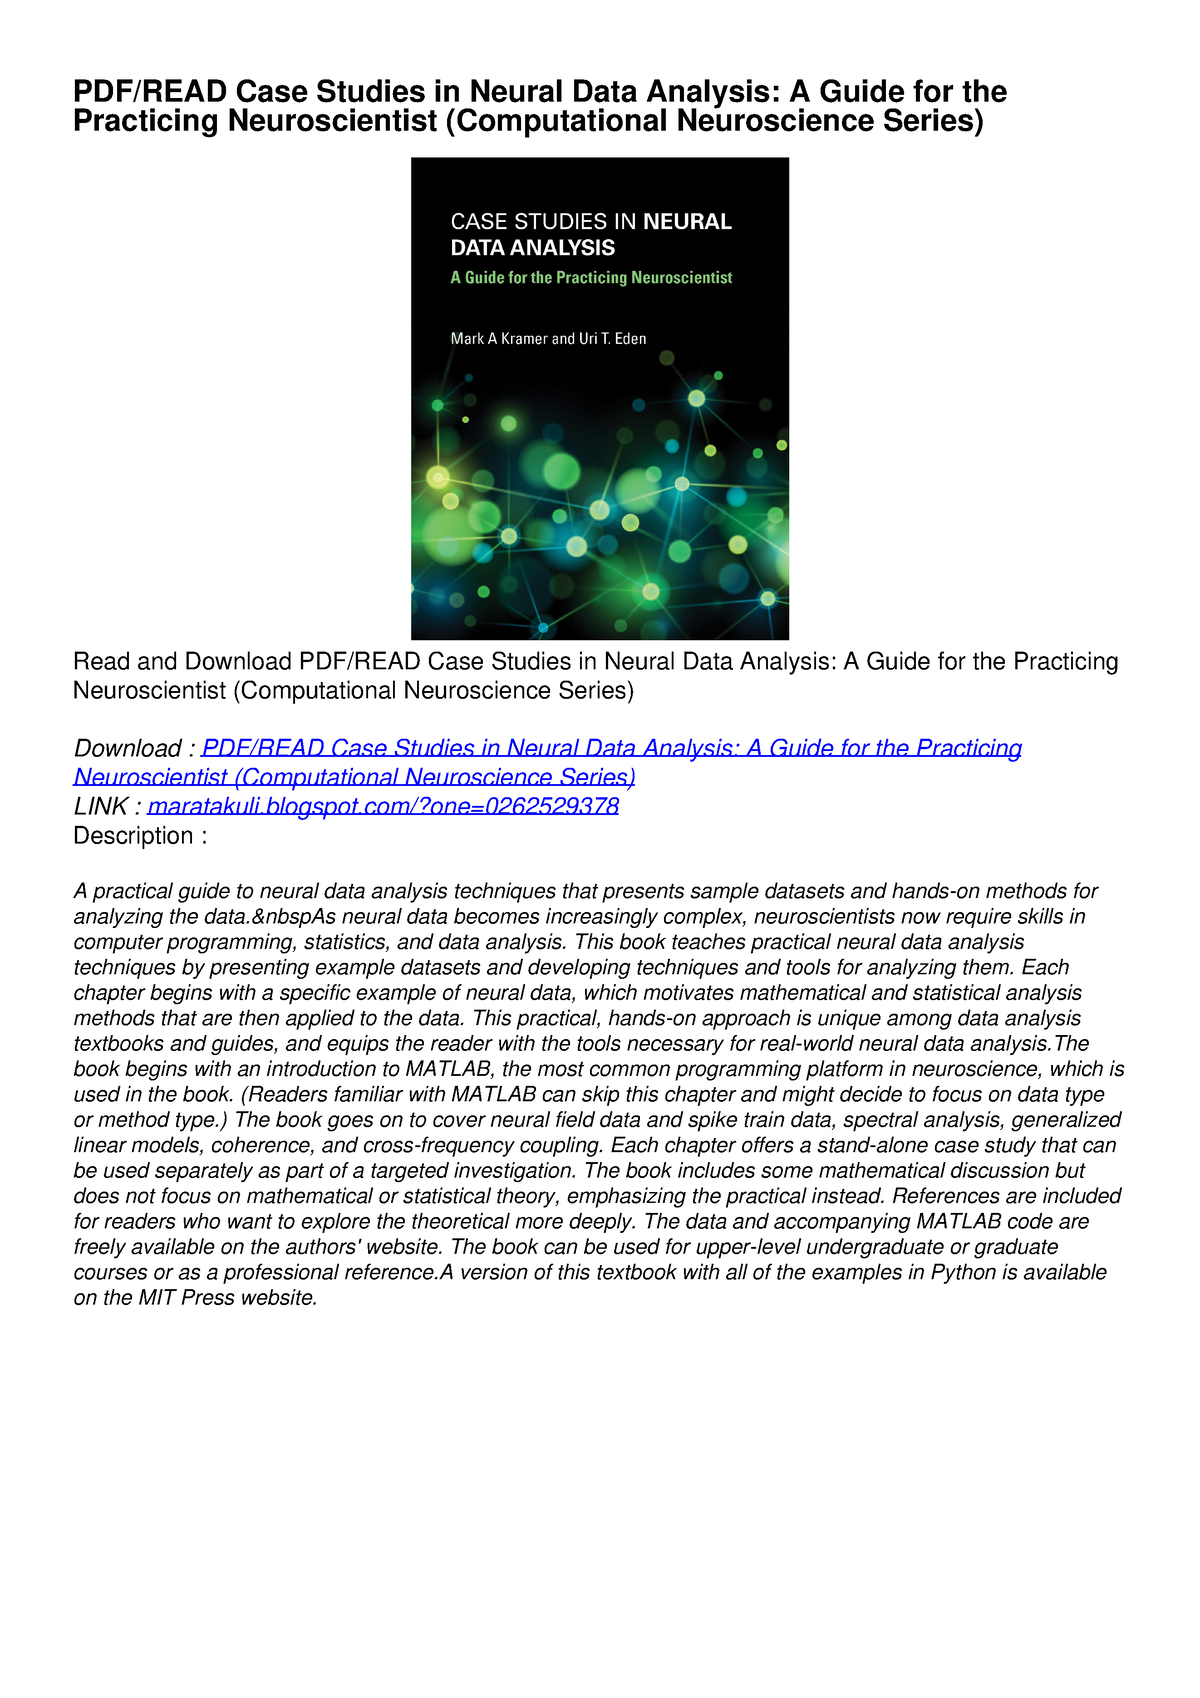 case studies in neural data analysis a guide for the practicing neuroscientist